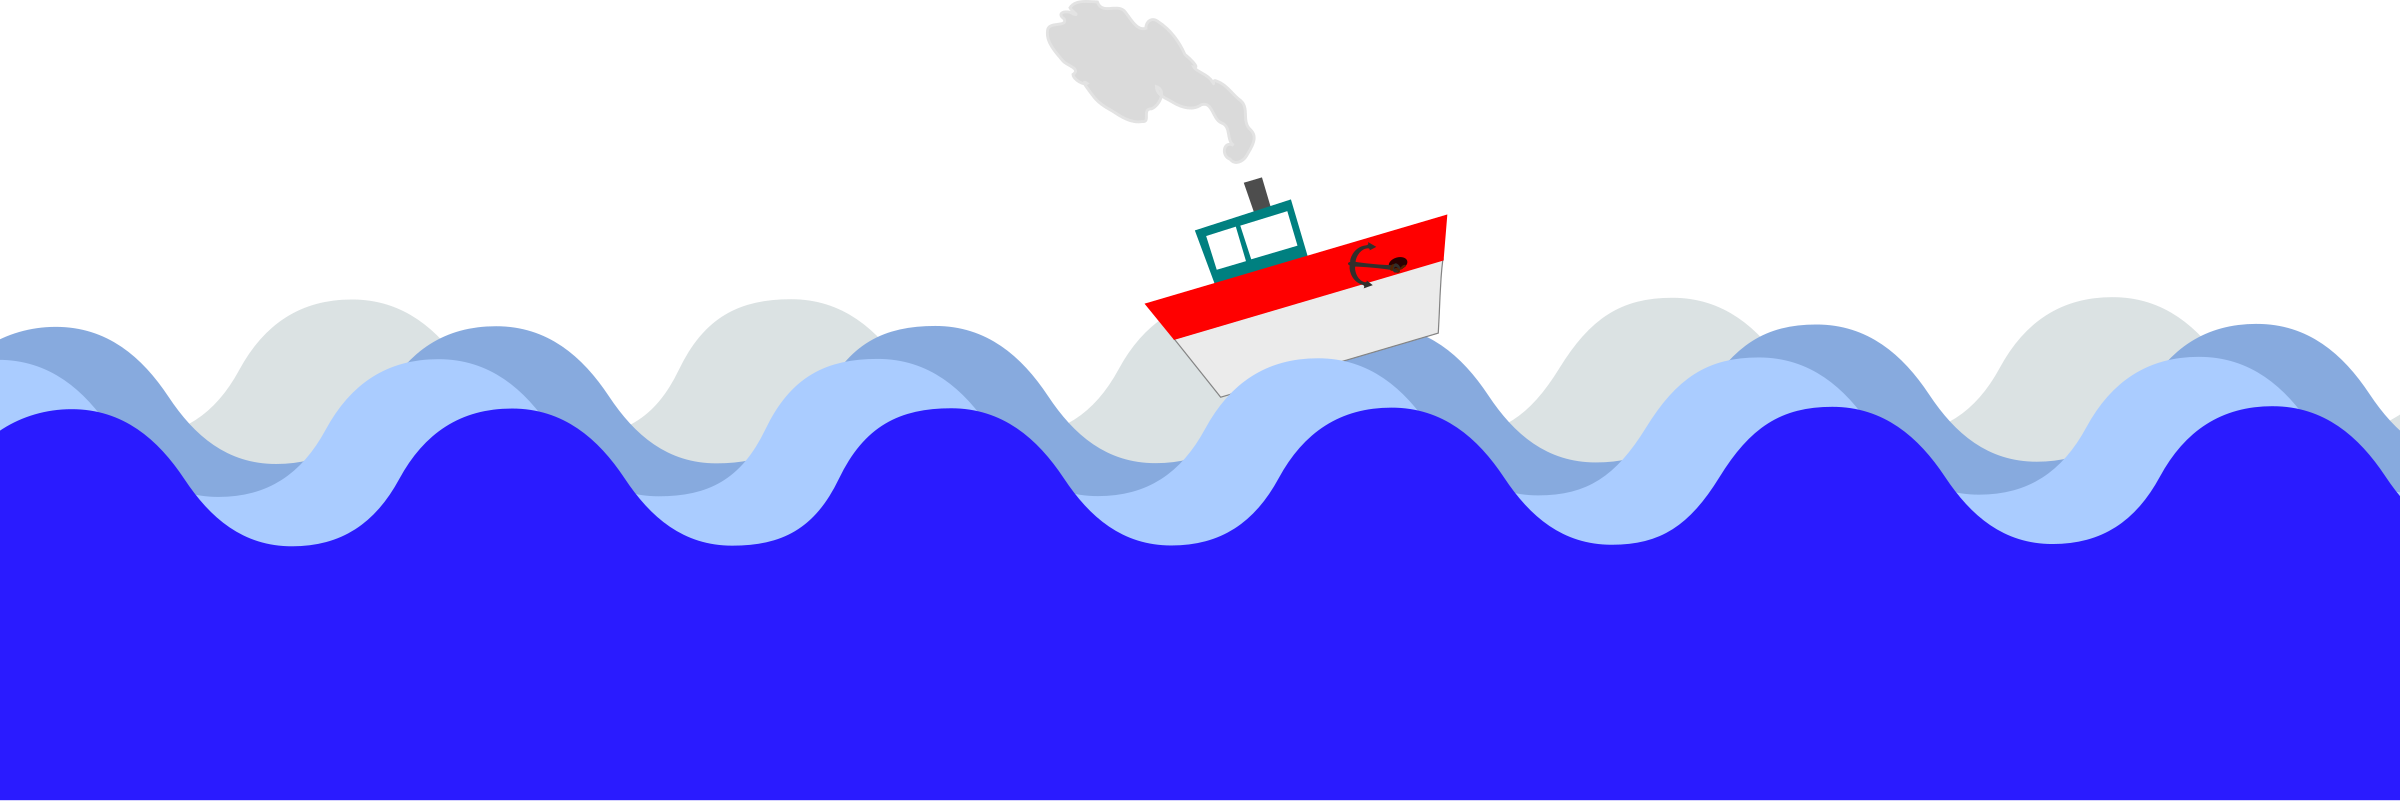 clipart boat on water - photo #17